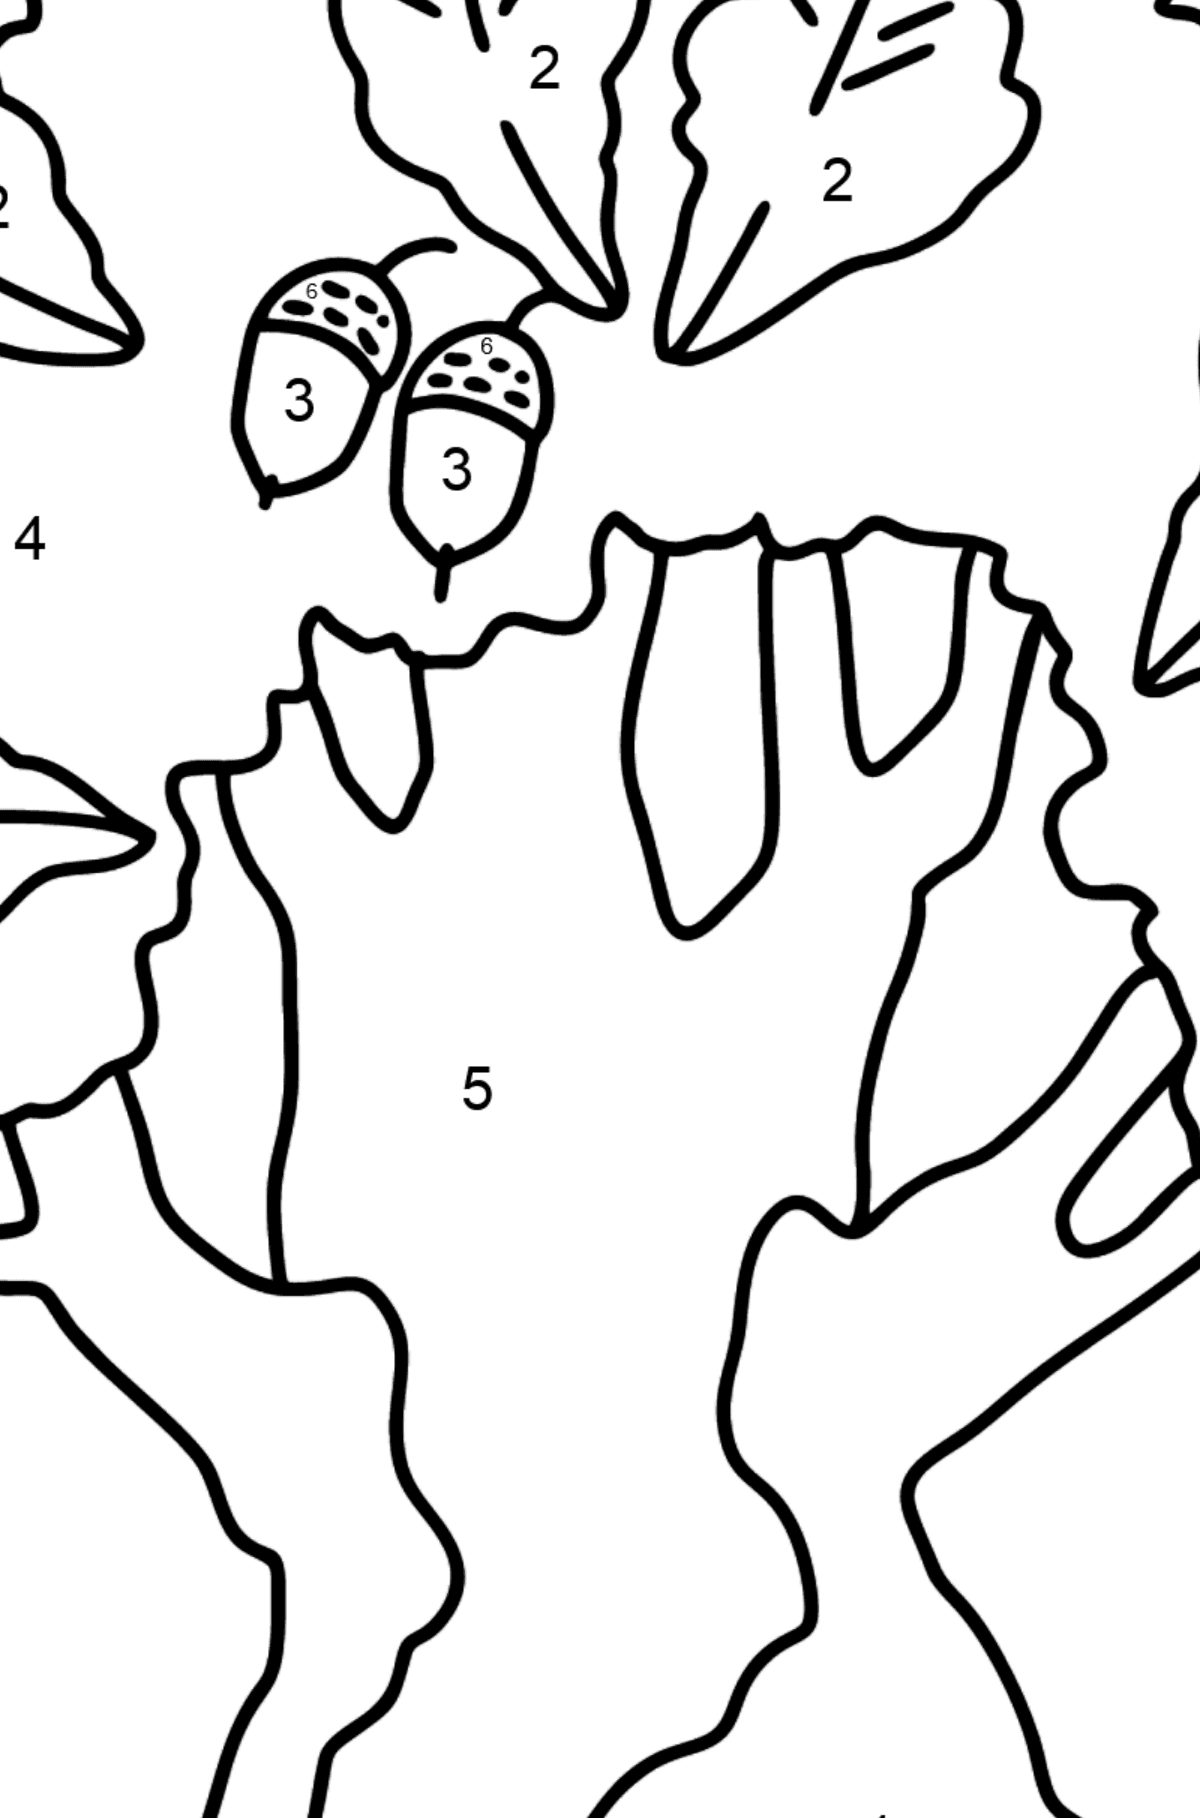 Oak coloring page - Difficult - Coloring by Numbers for Kids